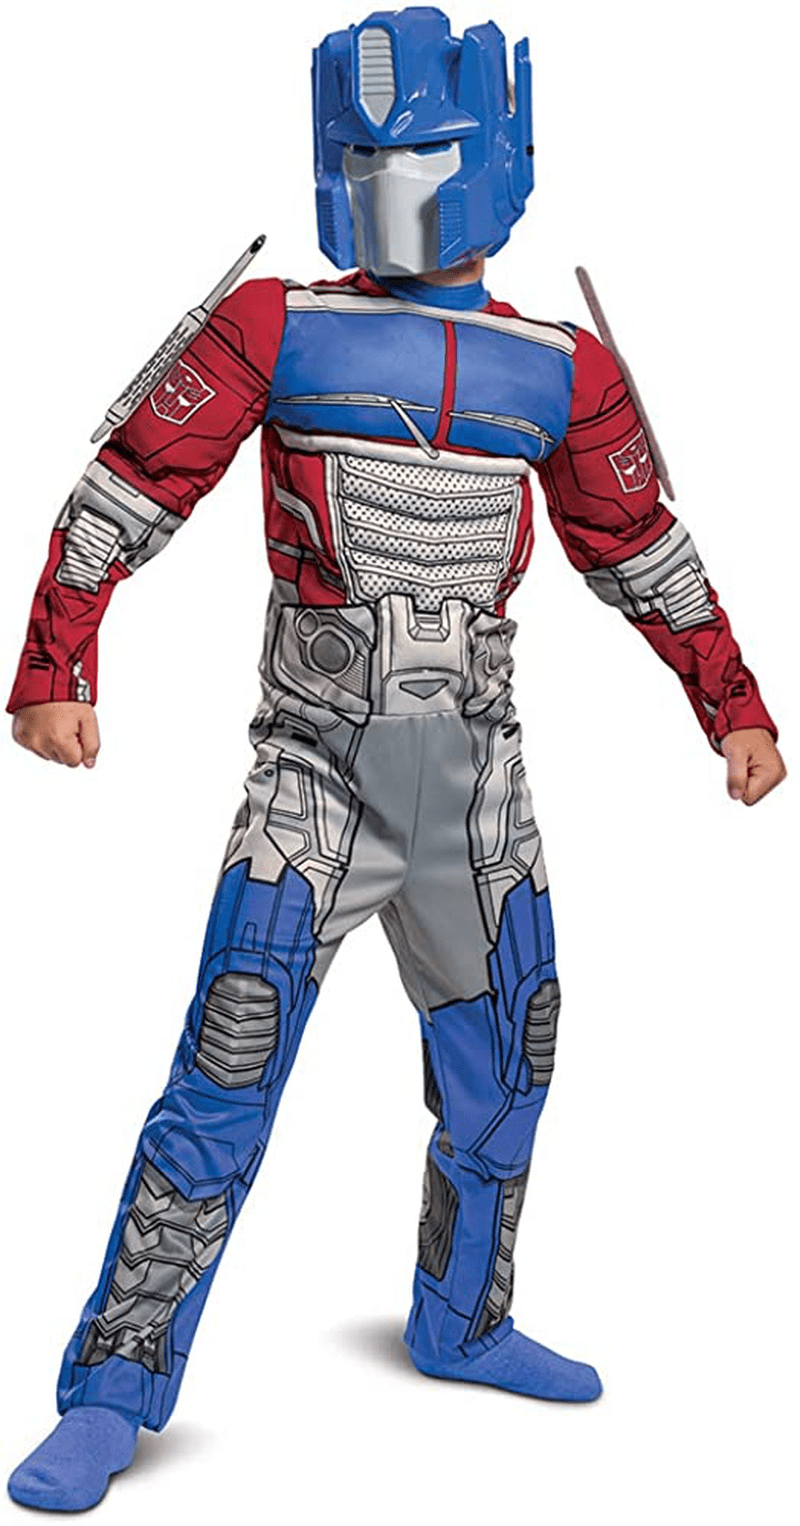 Transformers Muscle Optimus Prime Costume for Kids Apparel & Accessories > Costumes & Accessories > Costumes Disguise   